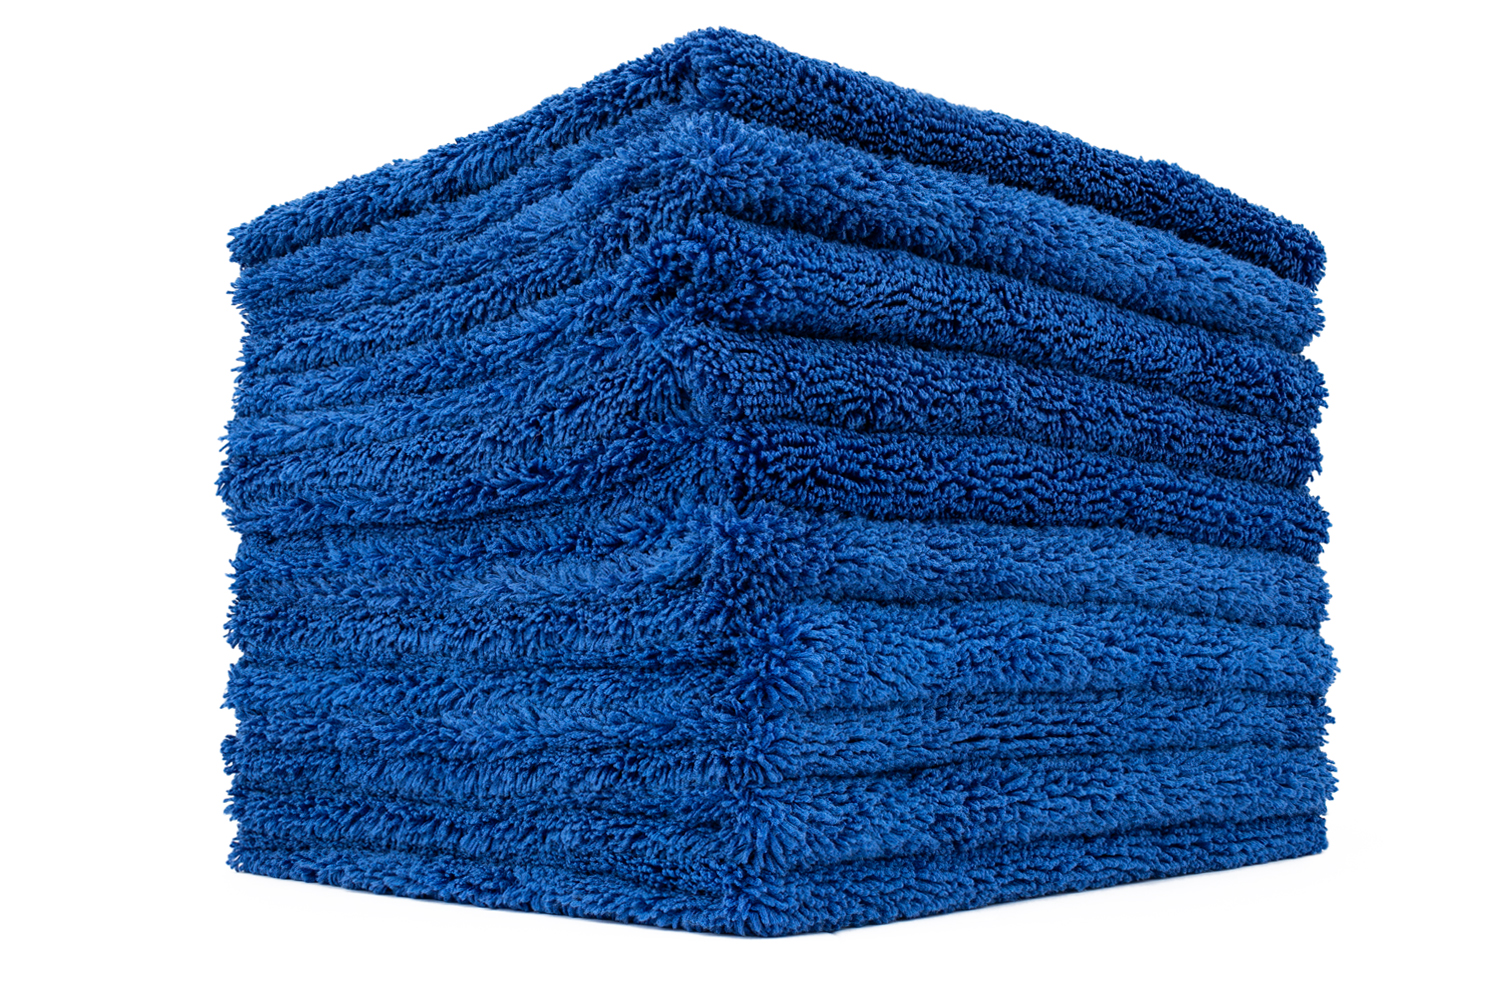 The Rag Company (10-Pack) 16 in. x 16 in. Professional Edgeless 365 GSM Premium 70/30 Blend Metal Polishing & Detailing Microfiber Towels The Miner